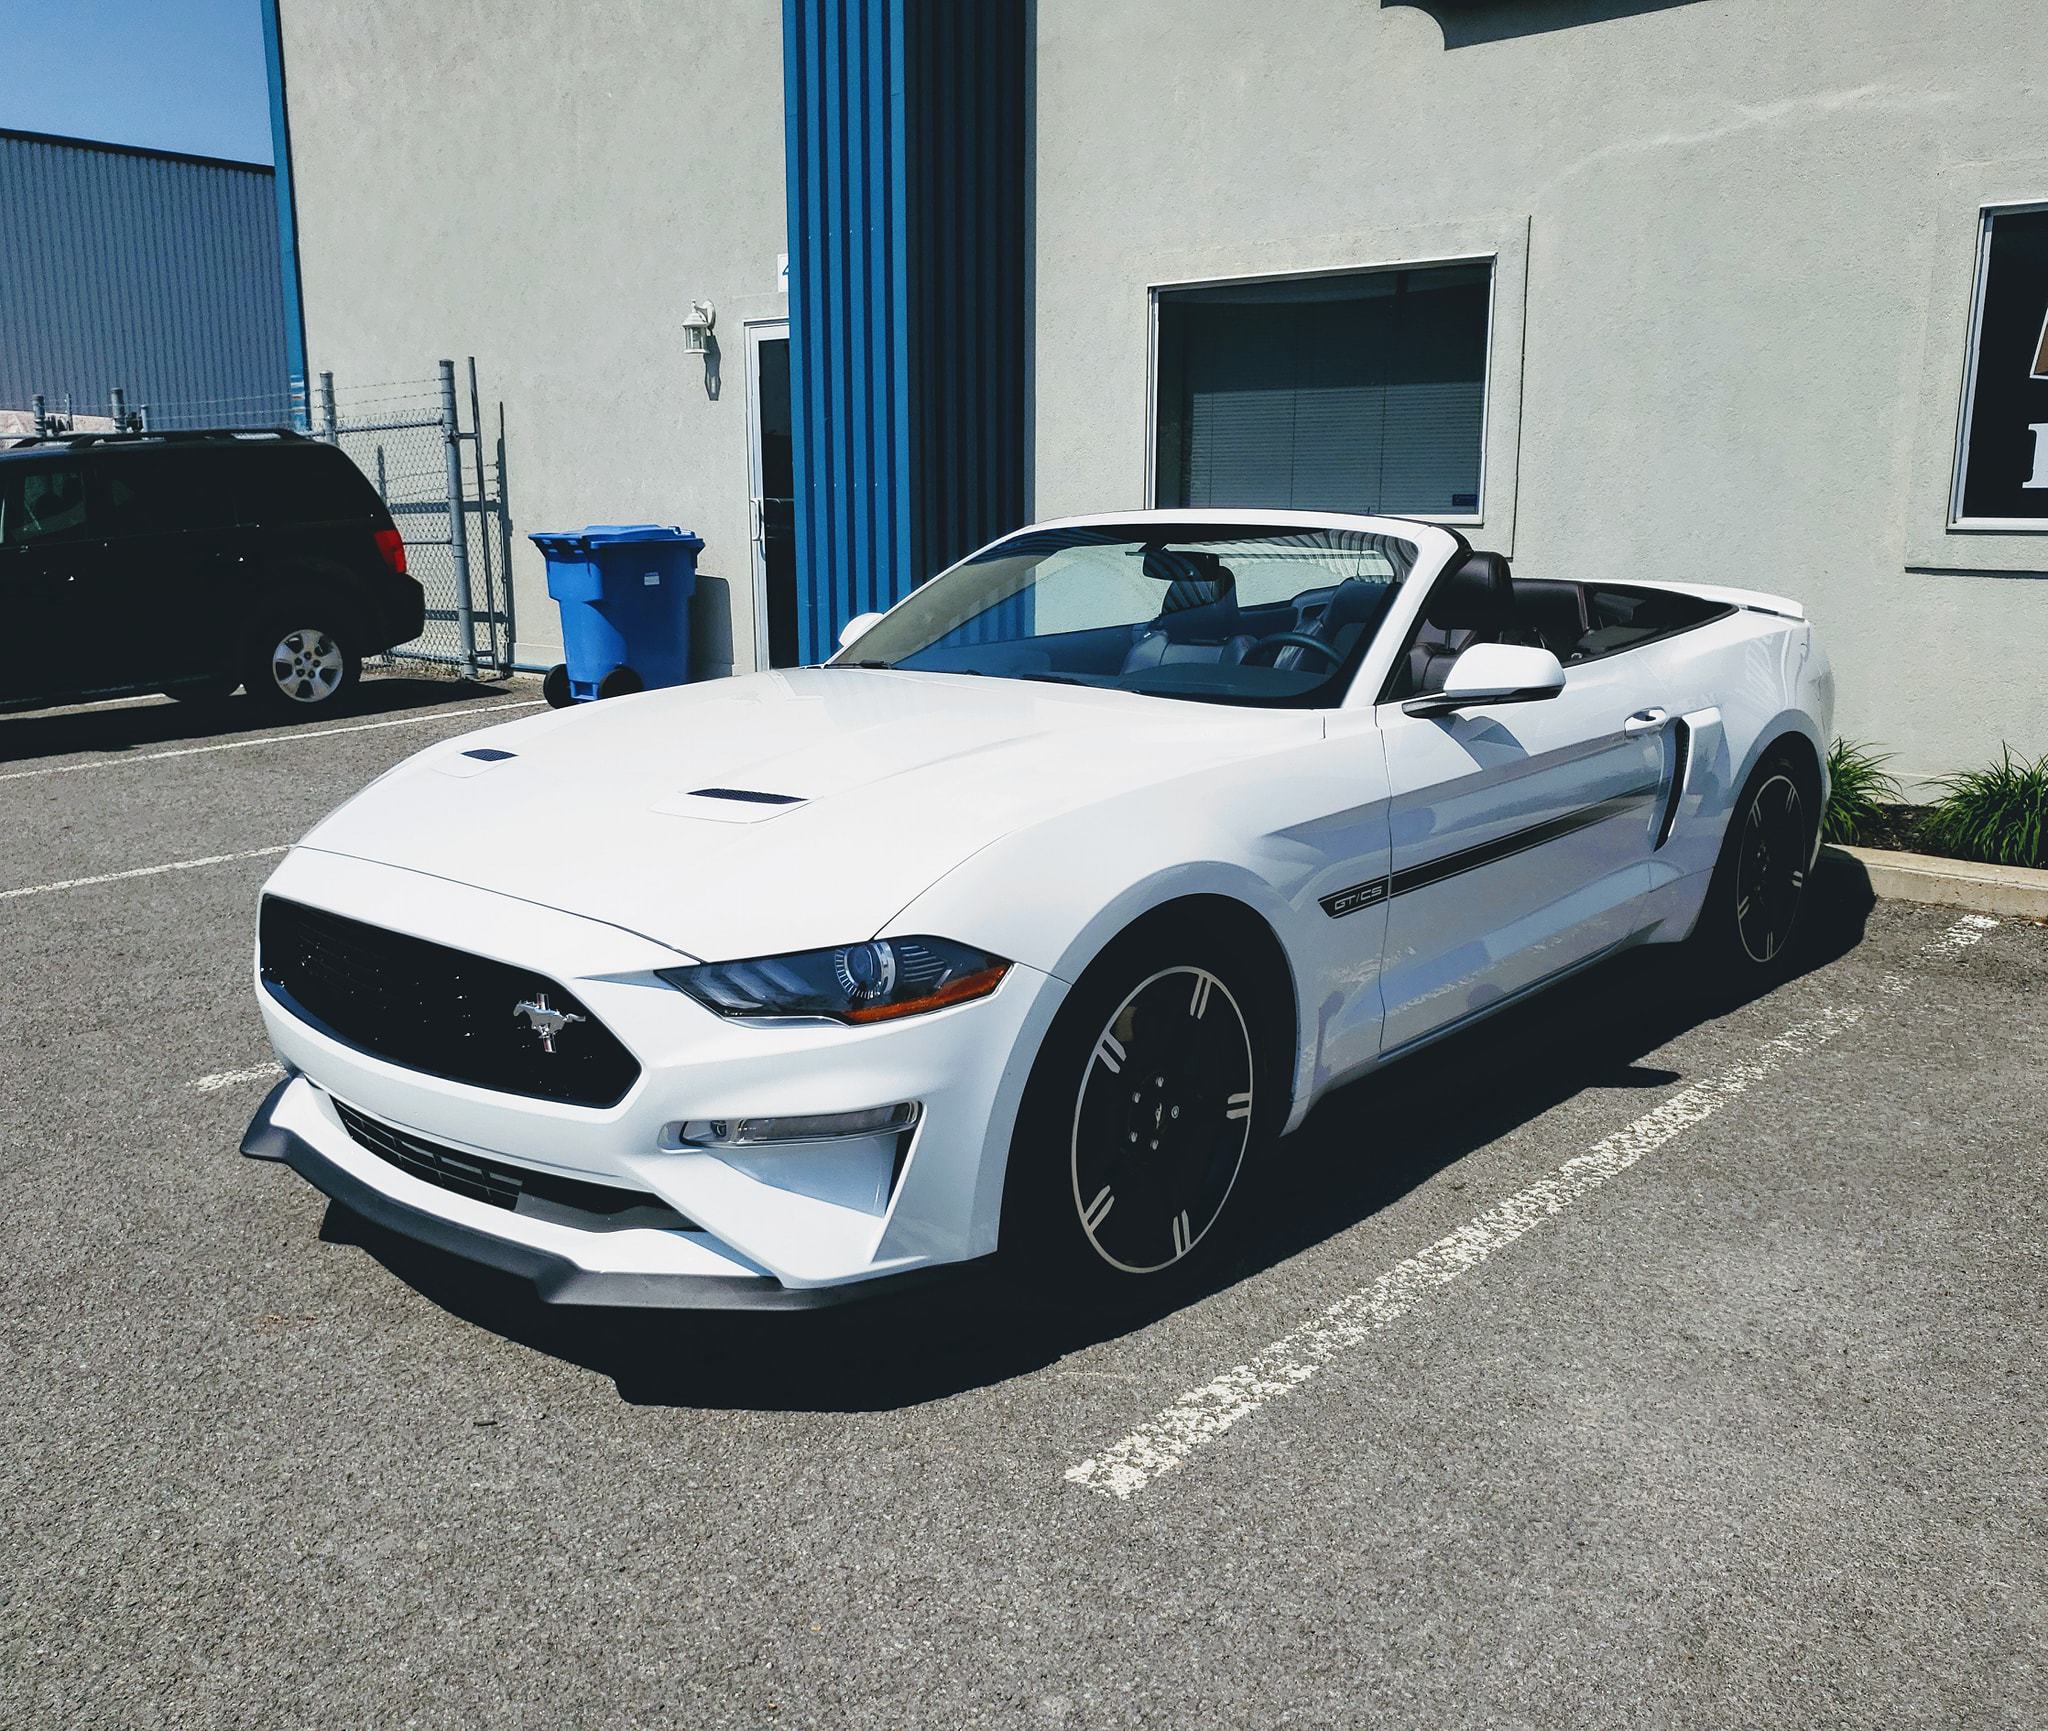 Ford Mustang California style 2020